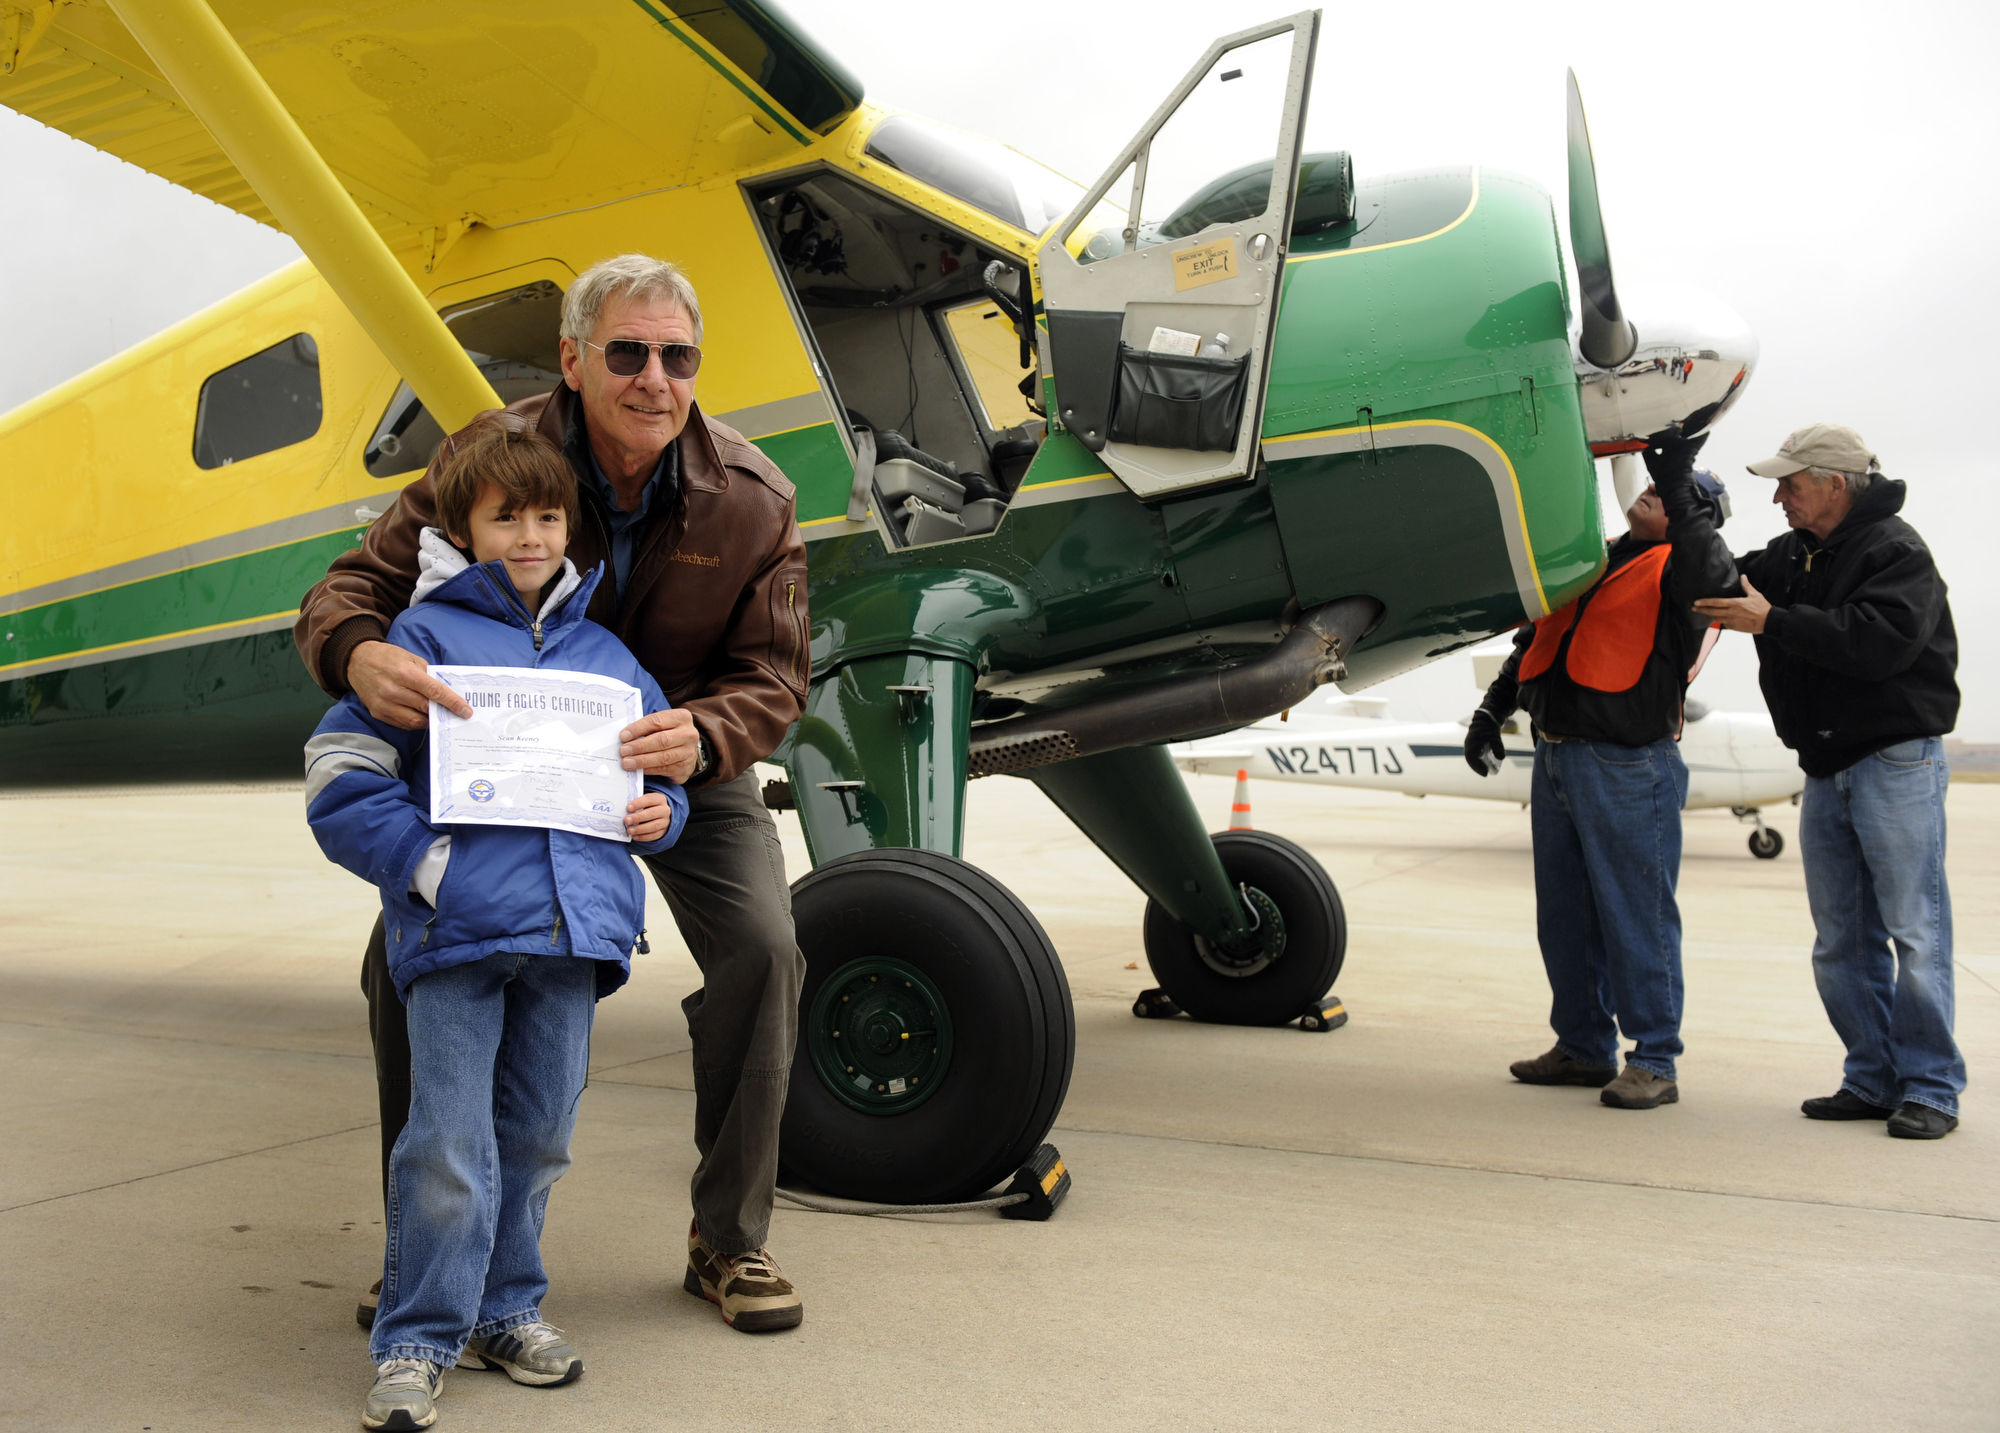 Harrison Ford visits Denver and gives some kids an airplane ride from Centennial Airport on November 14, 2009 | Source: Getty Images